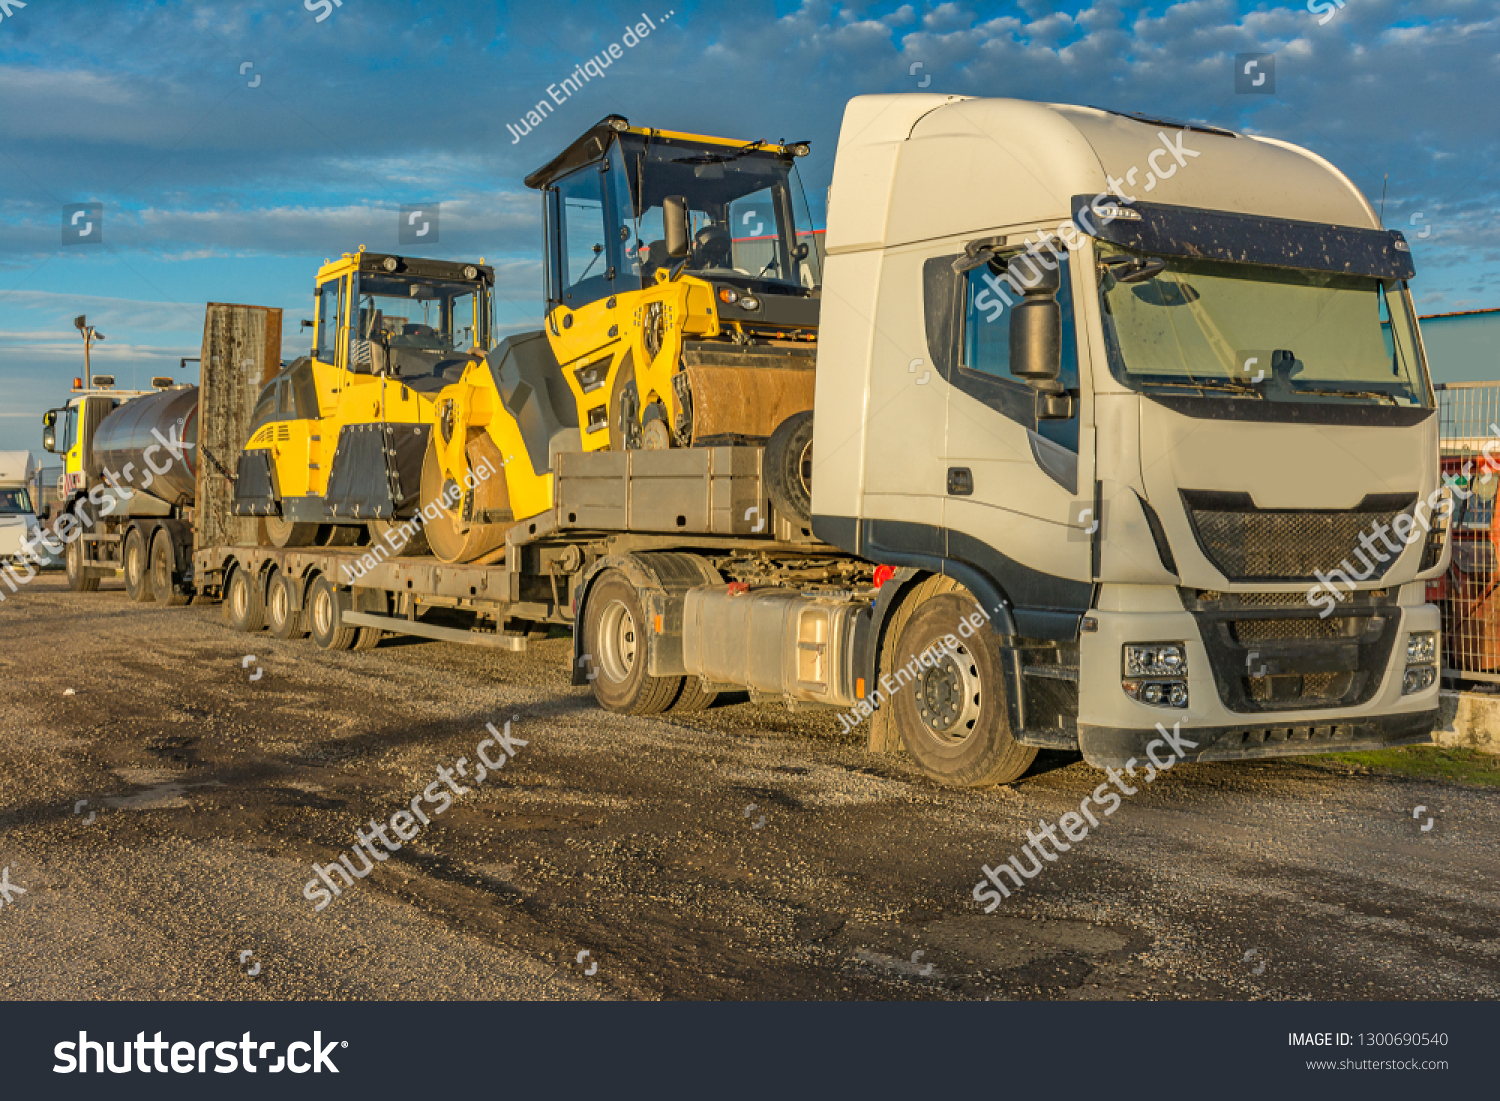 Road transport of heavy machinery in large trucks #1300690540